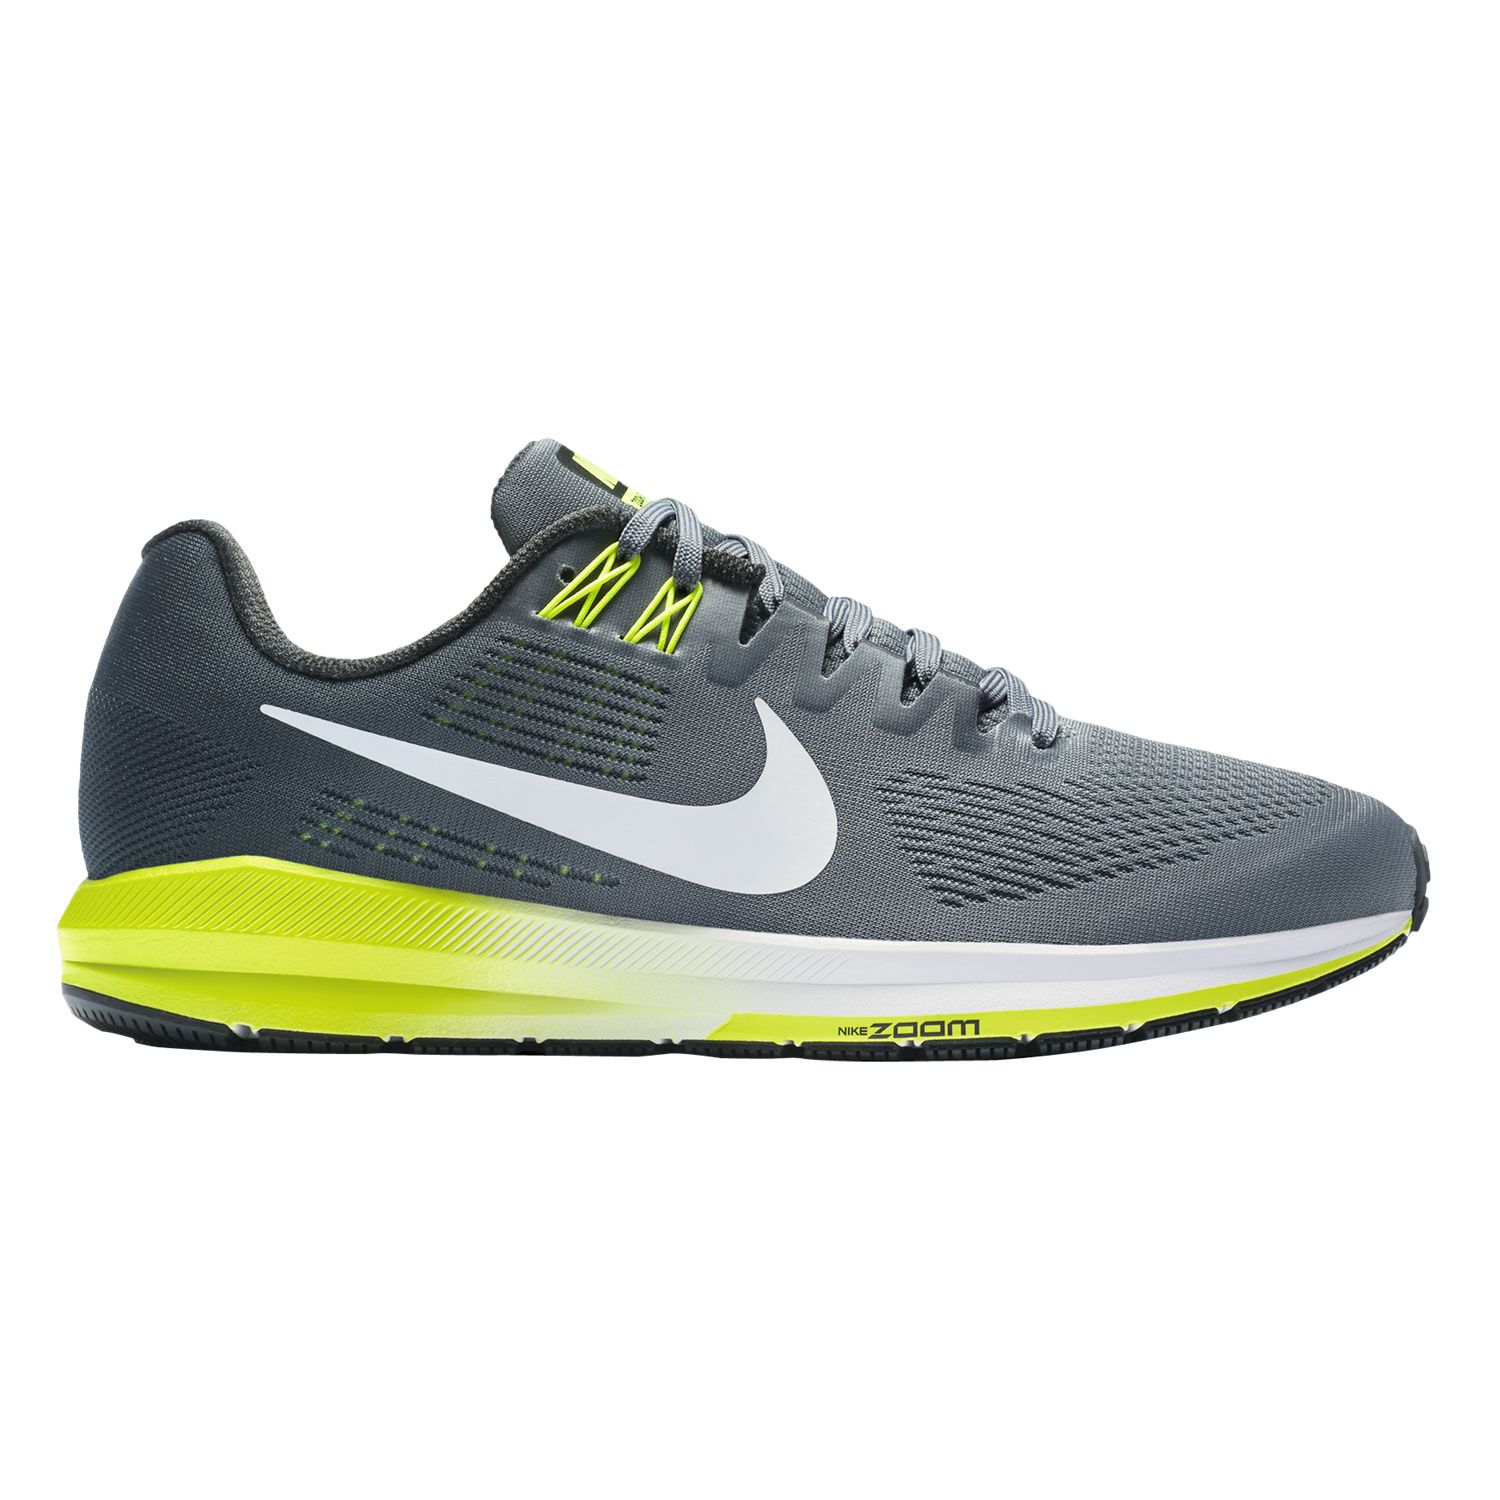 Nike Air Zoom Structure 21 Men's Running Shoes, Grey